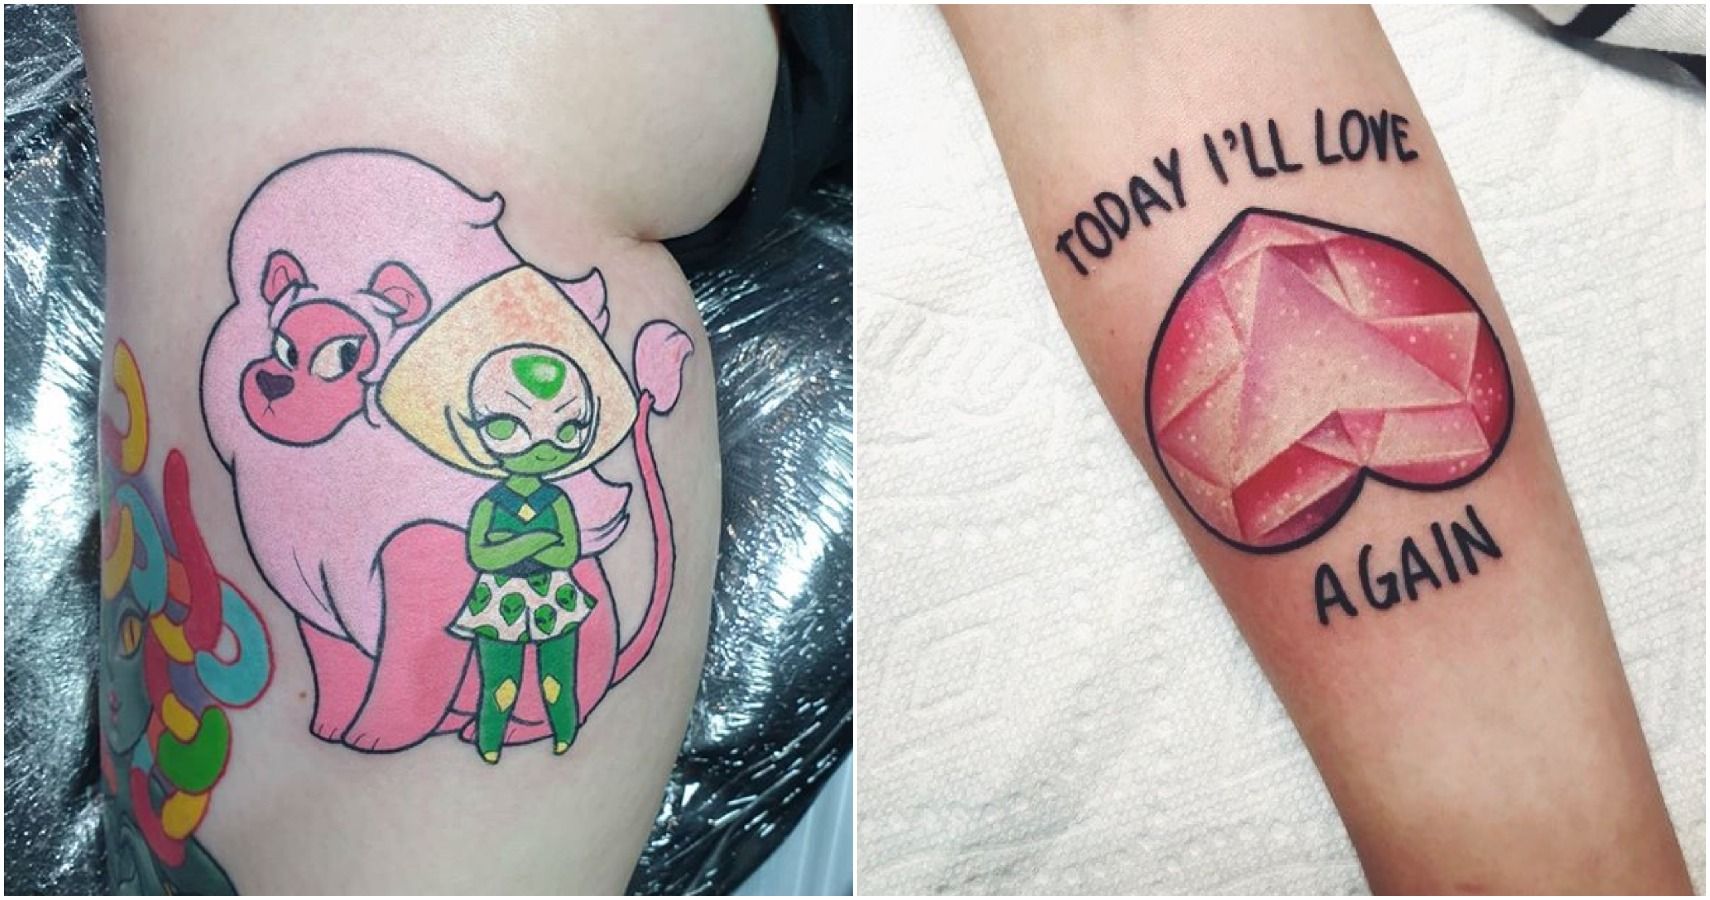 wanted to share some of the steven universe tattoo designs I finished today  for my portfolio hope you like them   rstevenuniverse